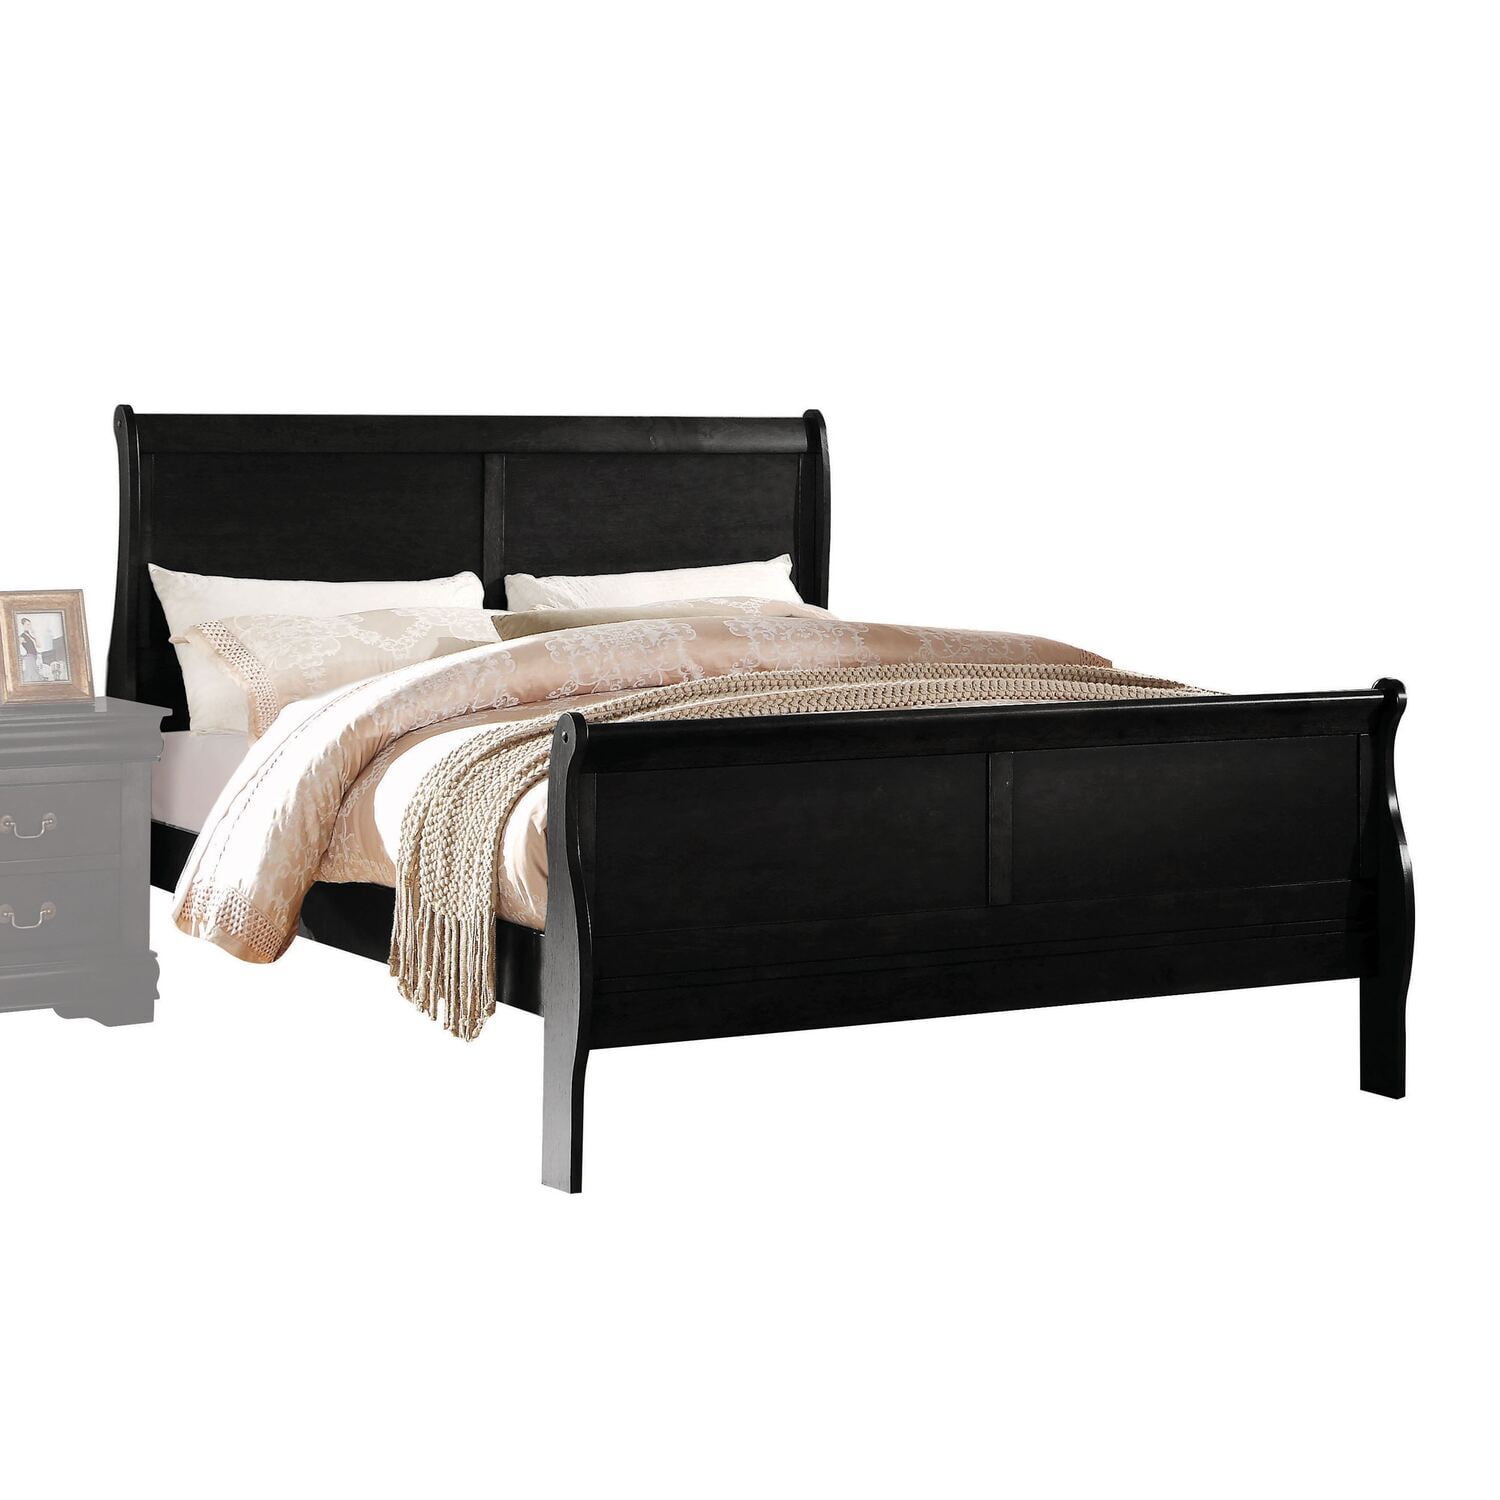 Picture of ACME 23727EK 2 Piece Louis Philippe Eastern King Size Bed - Black - 47 x 90 x 80 in.